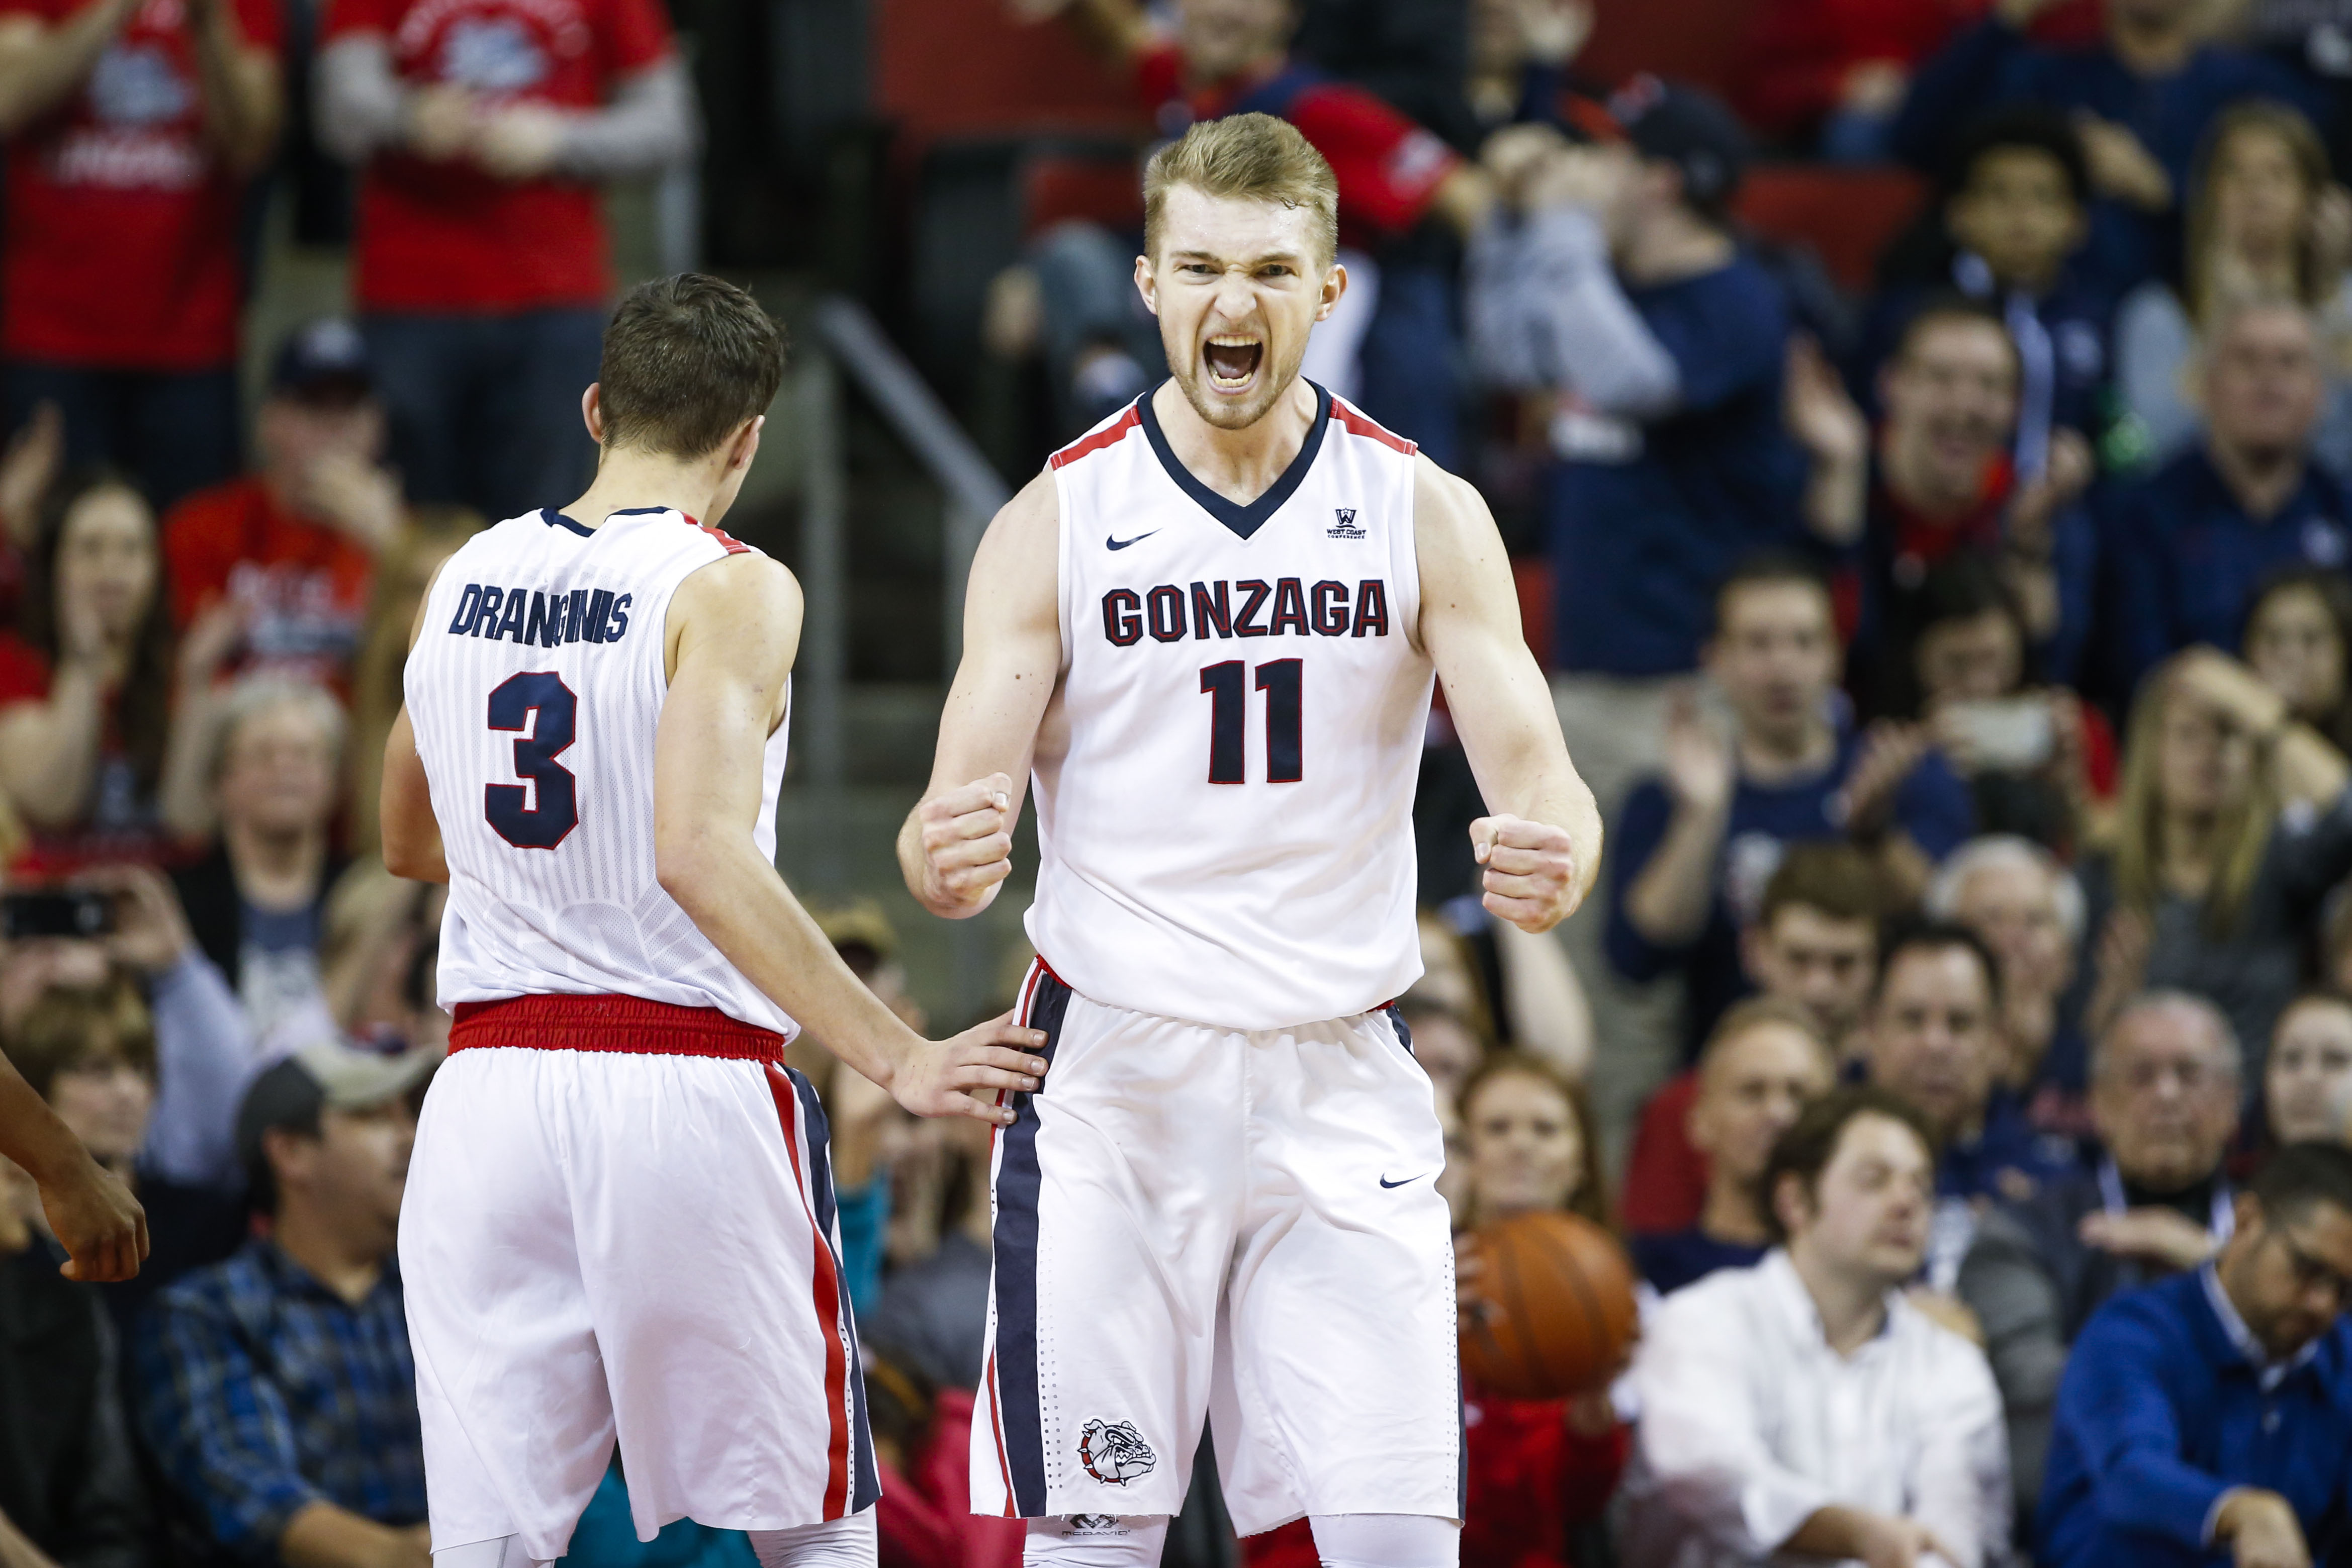 Thunder's Domantas Sabonis takes after famous father